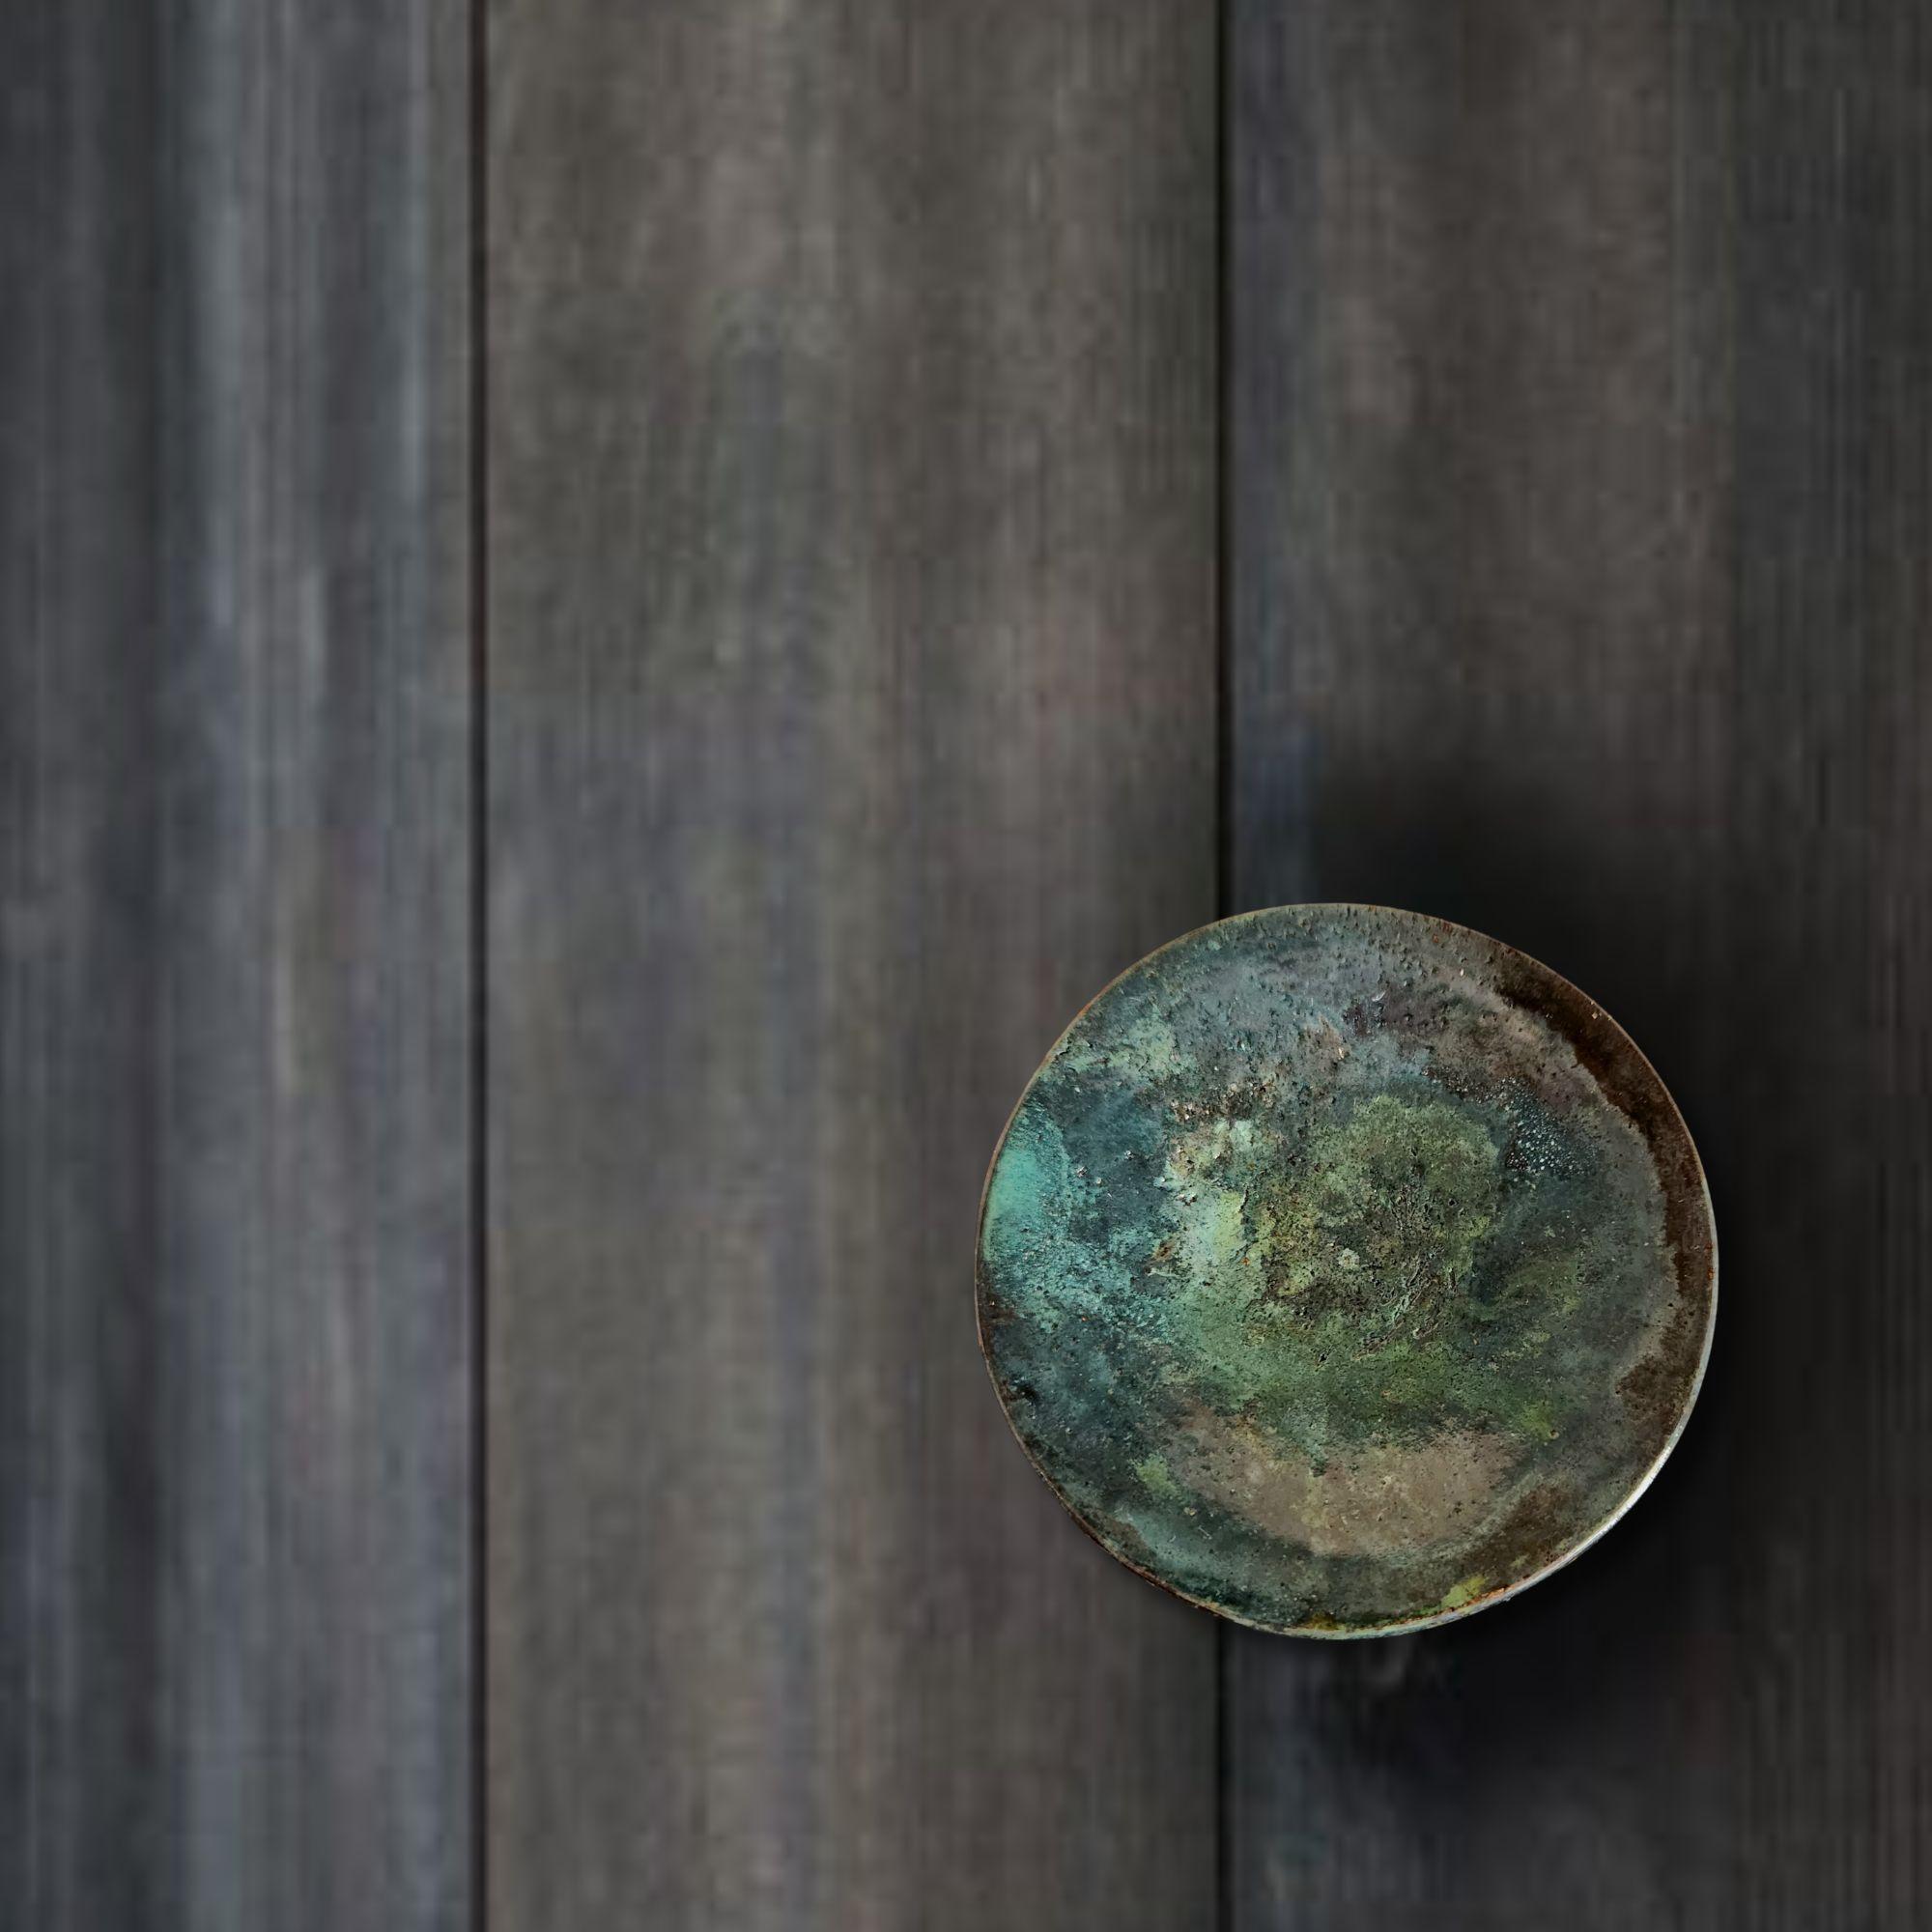 A tribute to nature, infinite source of patterns. Solid brass pull handle made in our workshops.
The enchanting green patina, reminiscent of weathered copper, adds a touch of vintage charm to your doors. This unique finish creates a sense of history